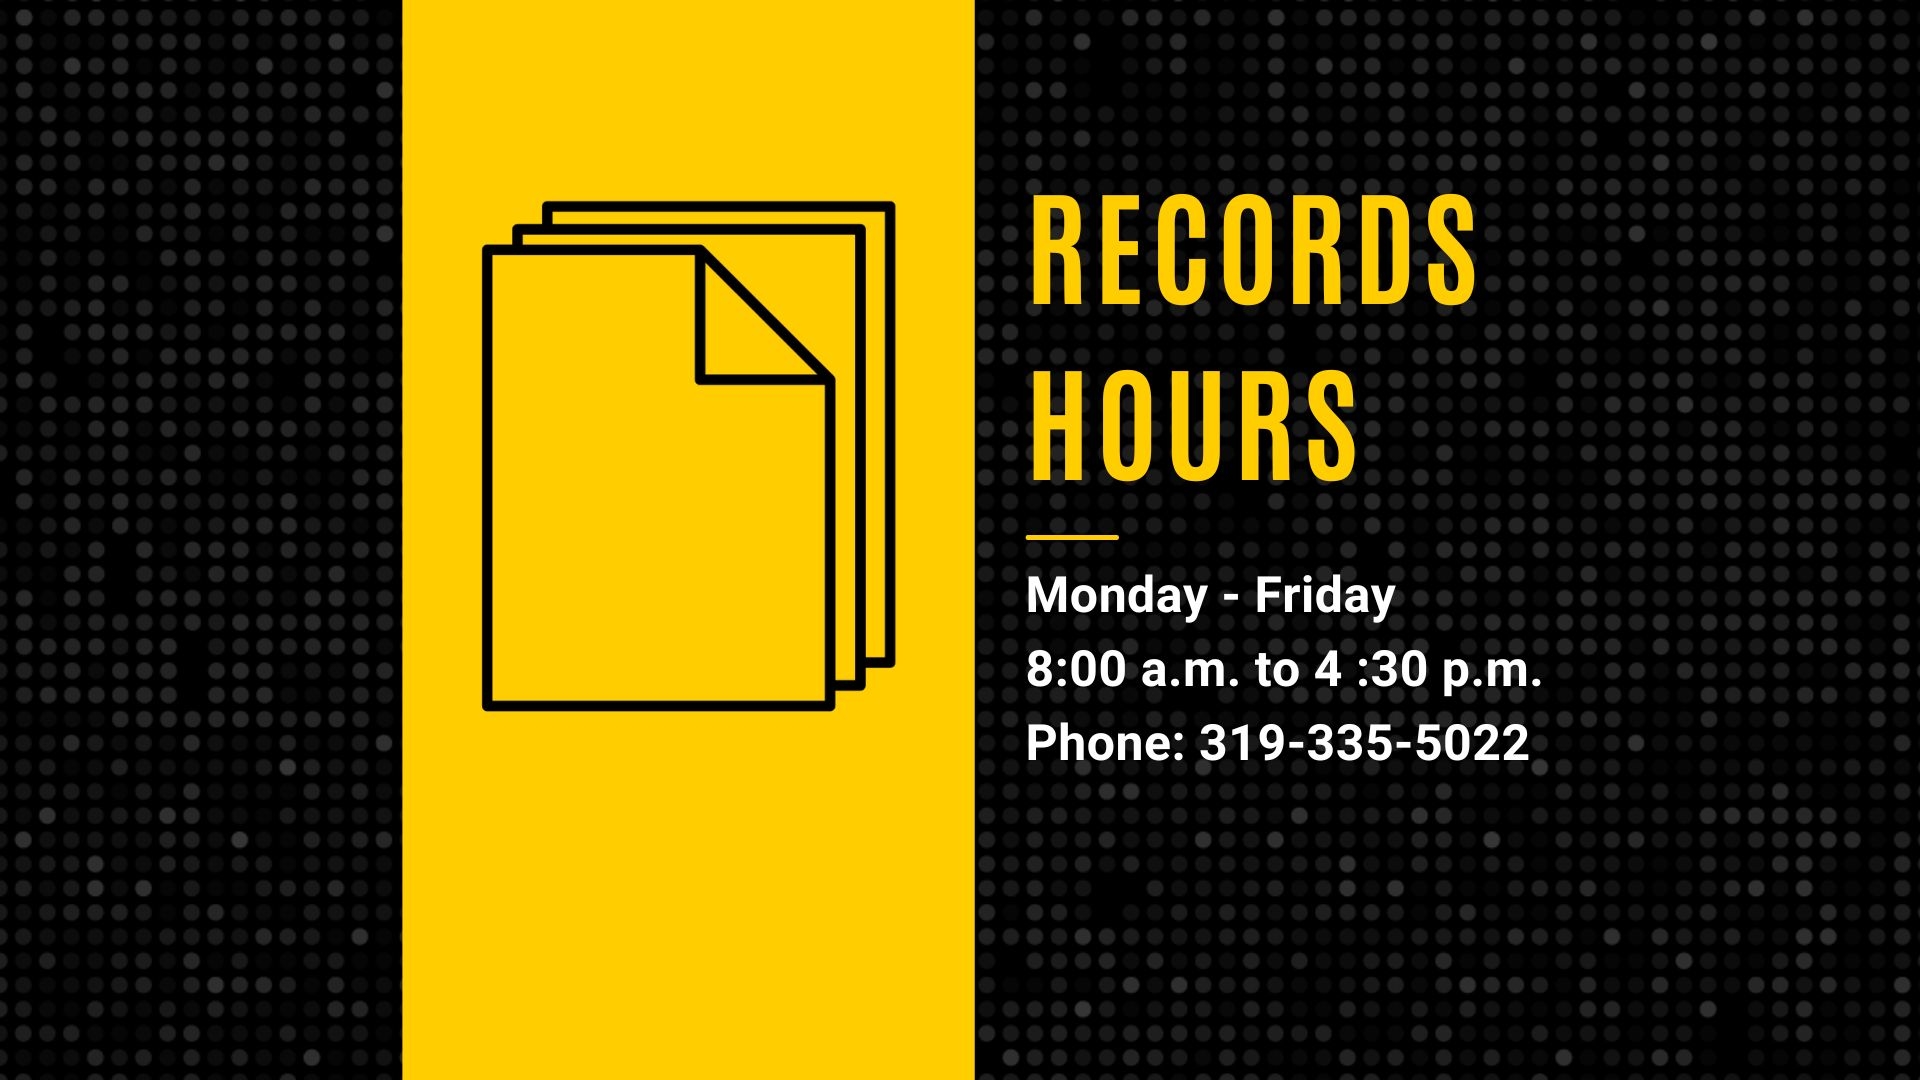 Records Hours Monday through Friday, 8 a.m. to 4:30 p.m. Phone: 319-335-5022